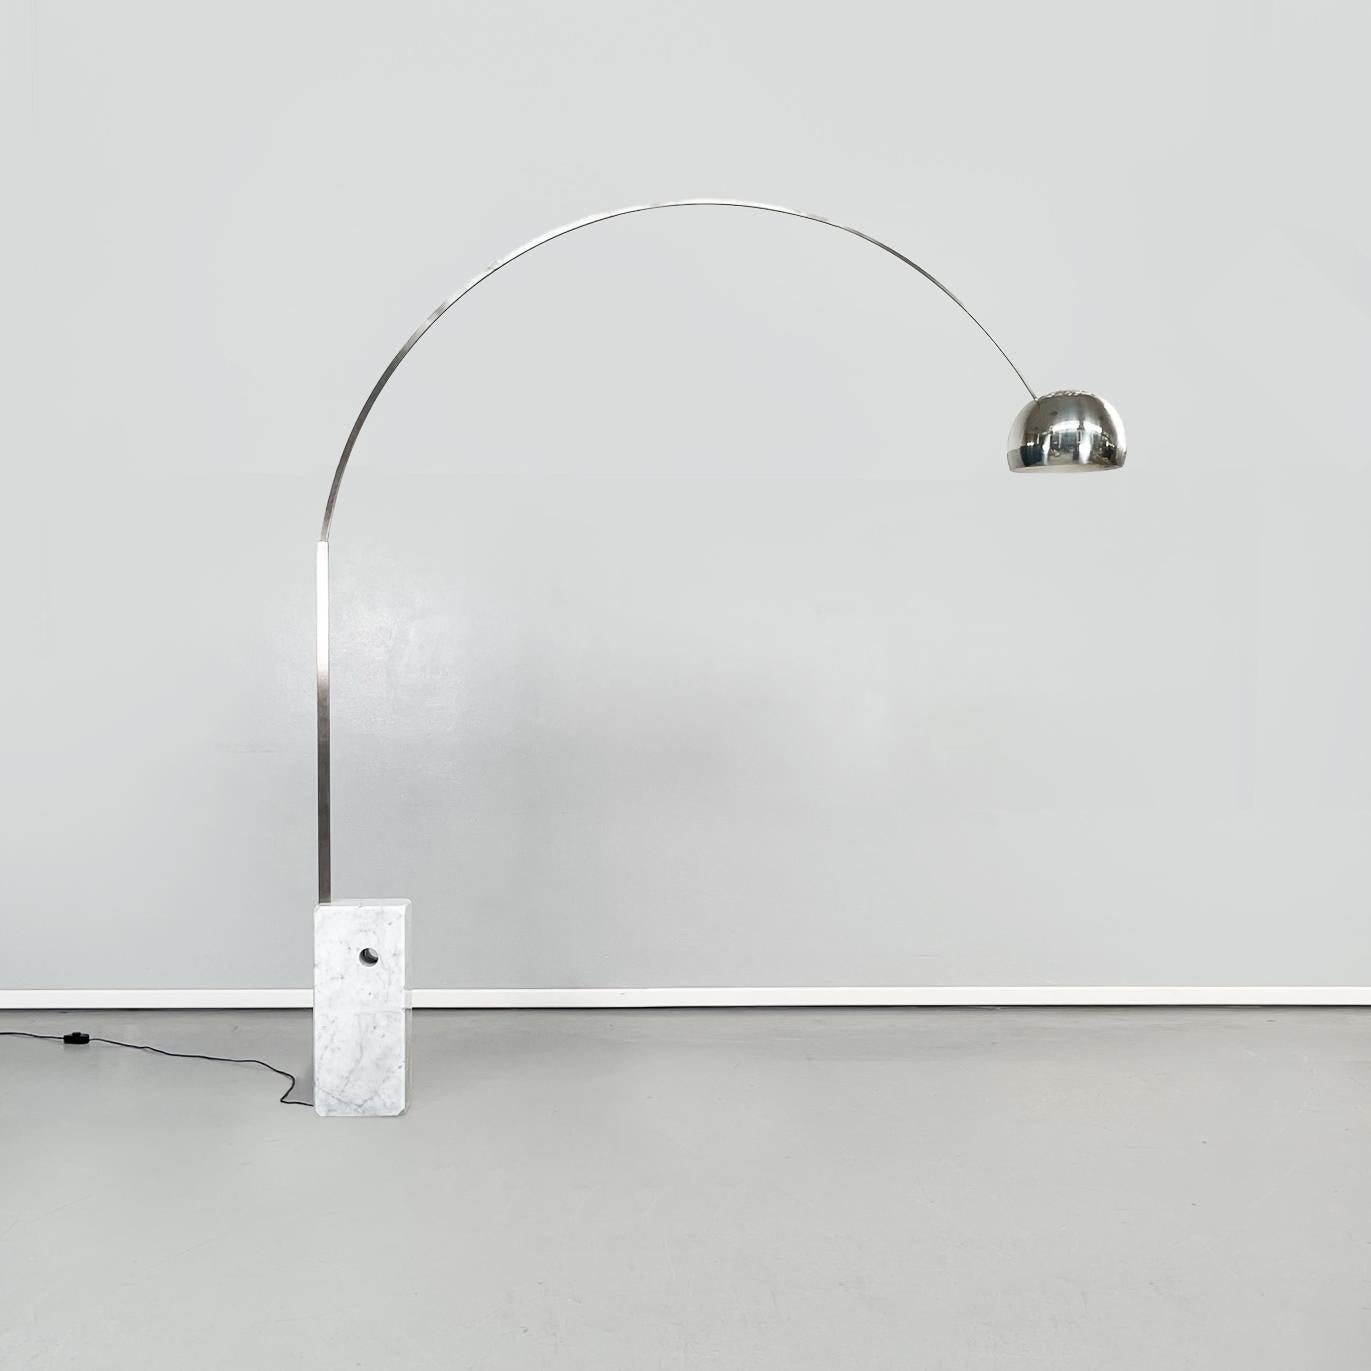 Italian mid-century Marble and steel Arco floor lamp by Castiglioni for Flos, 1962
Iconic floor lamp mod. Arco with direct light with white Carrara marble base and telescopic stem in satin stainless steel. Swiveling and height-adjustable reflector